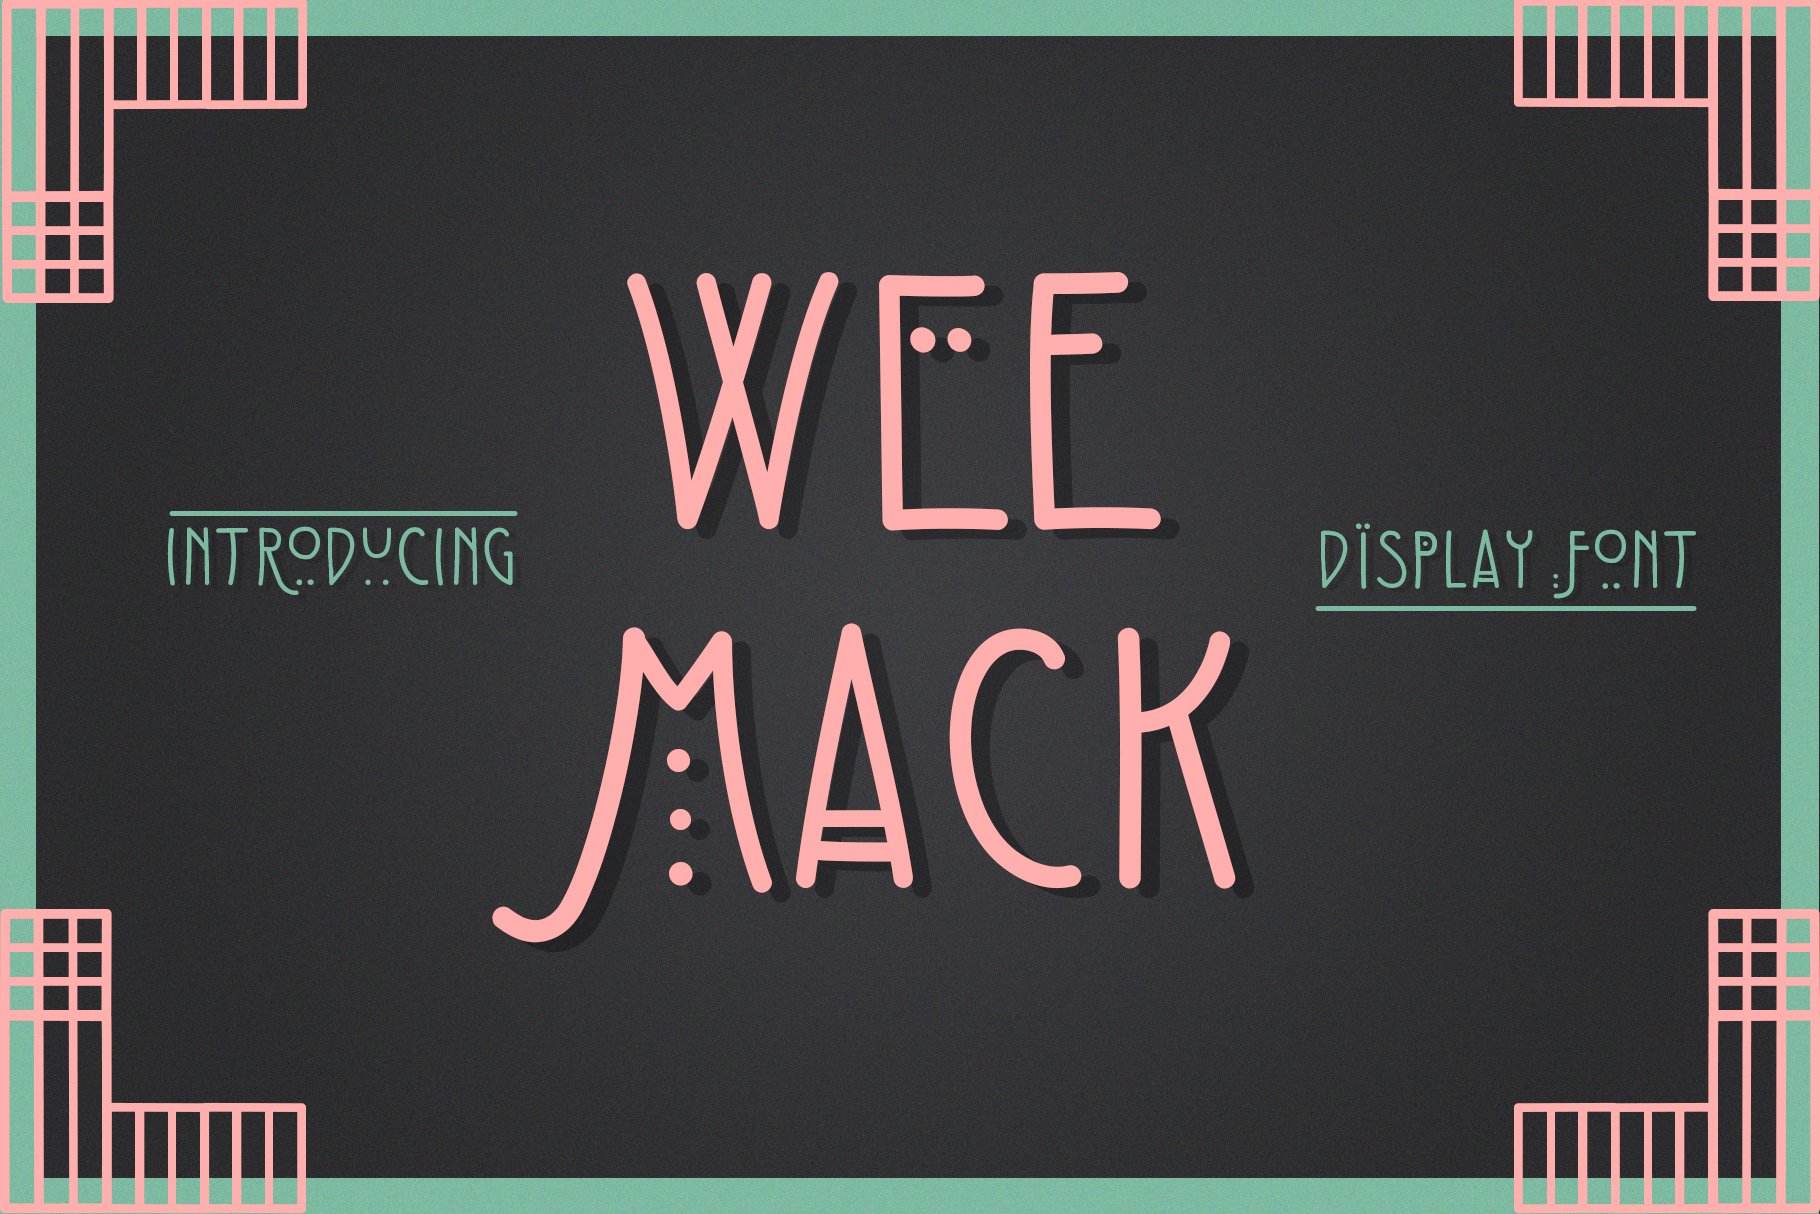 The Wee Mack Display Font cover image.